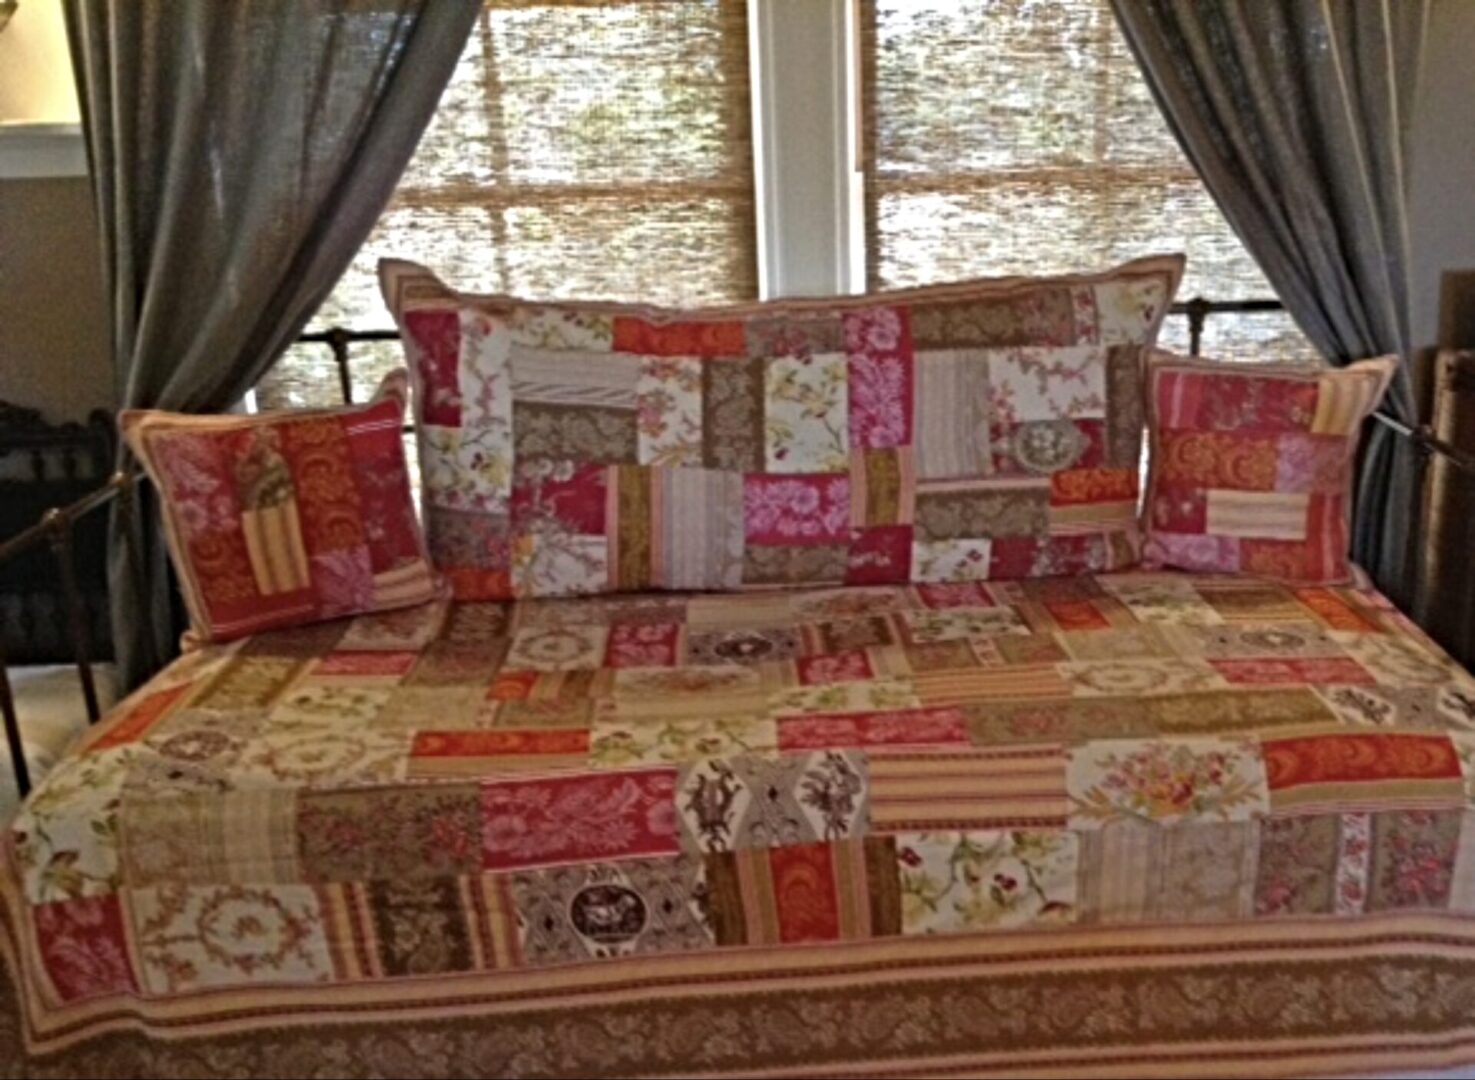 A bed with red, white, and brown patches